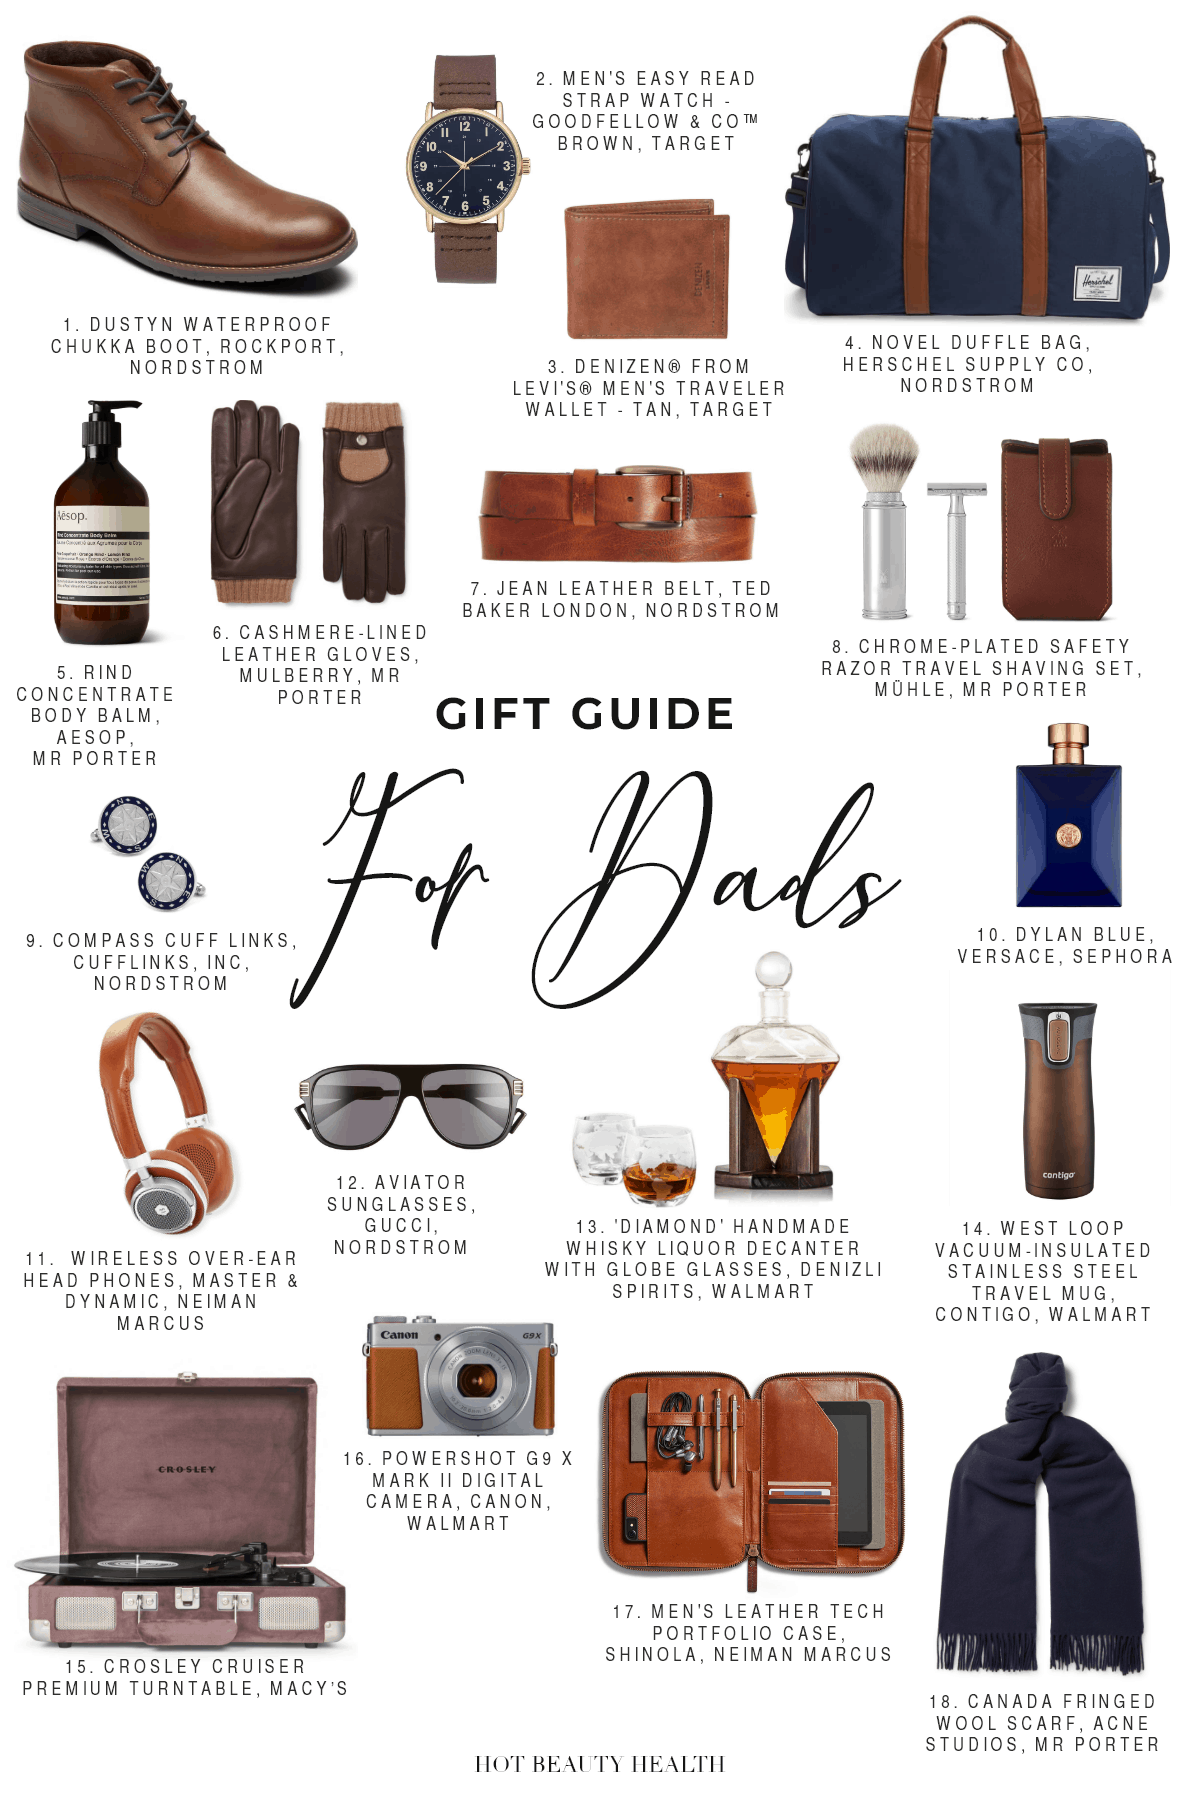 https://www.hotbeautyhealth.com/wp-content/uploads/2013/11/holiday-gift-guide-for-dads-2019.png